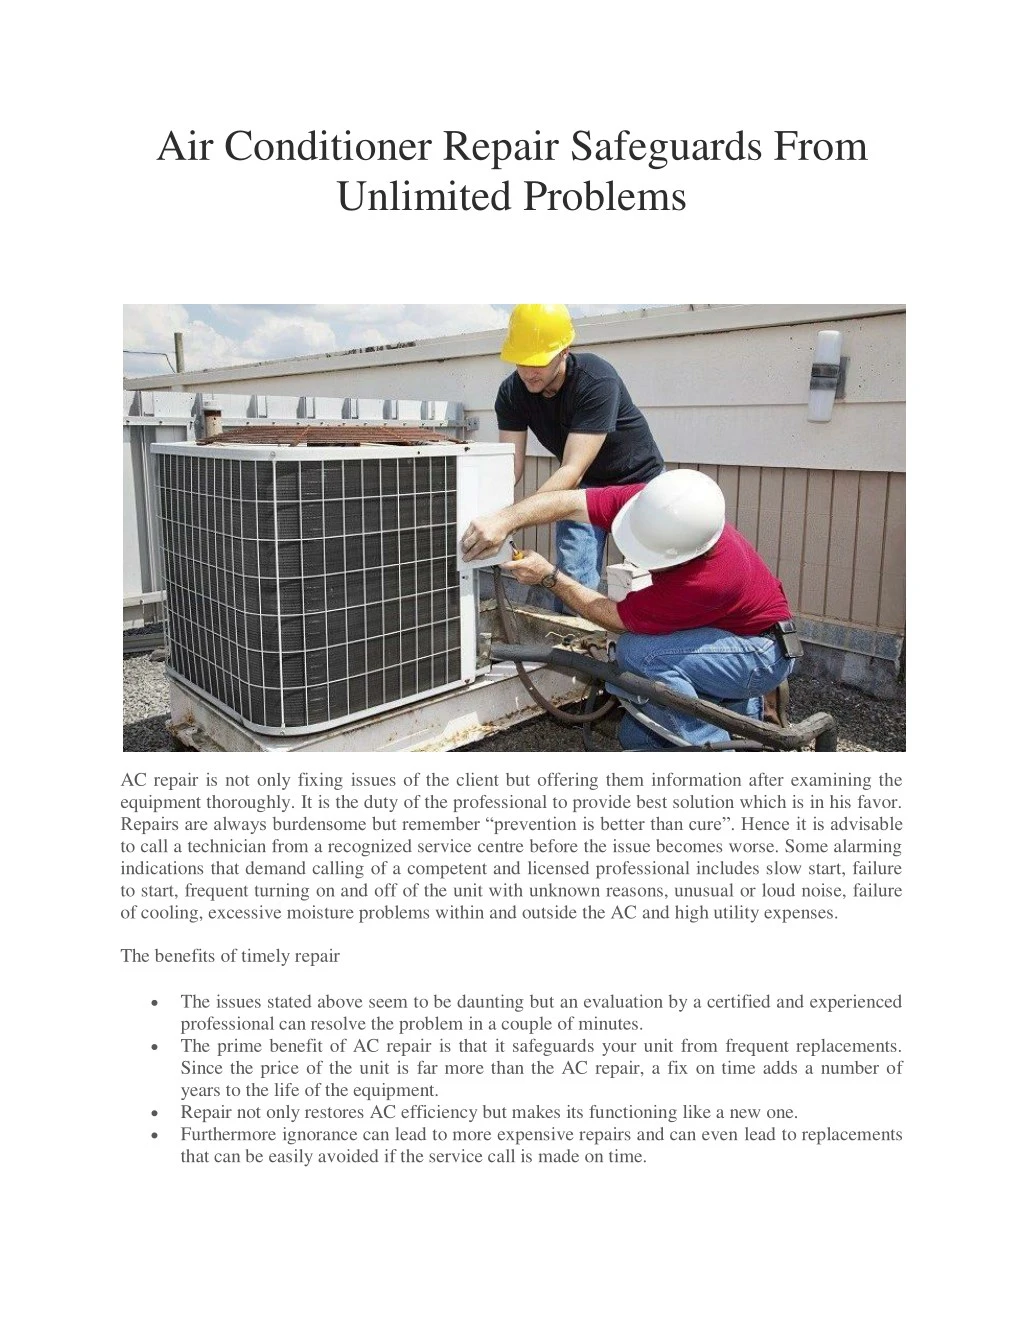 air conditioner repair safeguards from unlimited